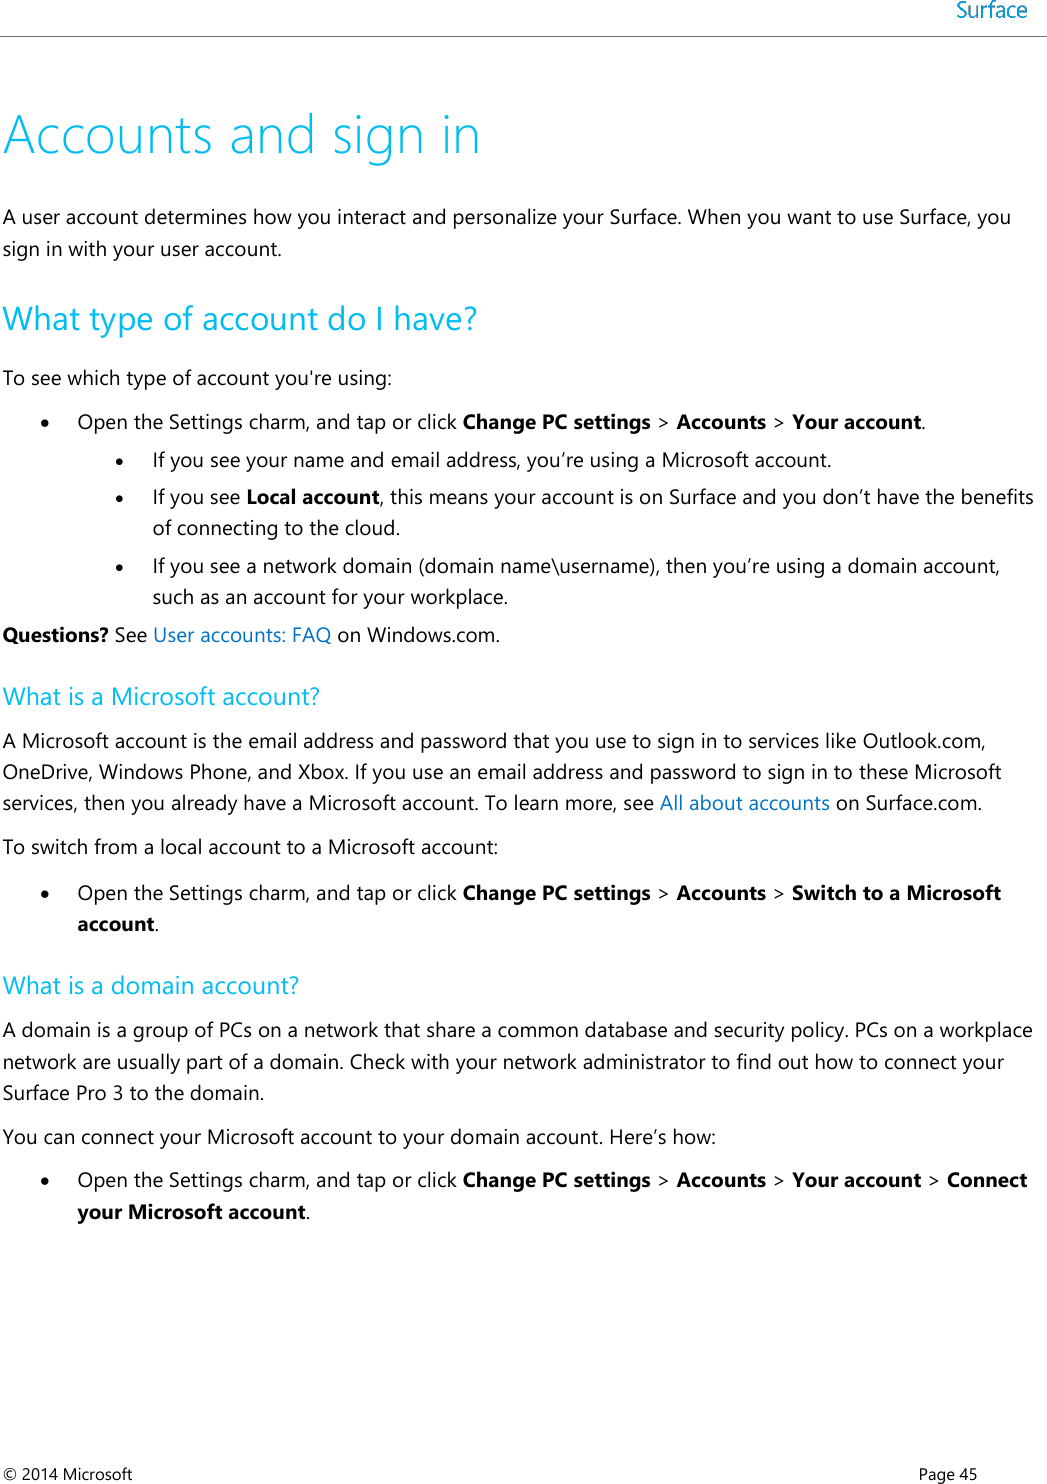  © 2014 Microsoft      Page 45  Accounts and sign in A user account determines how you interact and personalize your Surface. When you want to use Surface, you sign in with your user account. What type of account do I have? To see which type of account you&apos;re using:  Open the Settings charm, and tap or click Change PC settings &gt; Accounts &gt; Your account.  If you see your name and email address, you’re using a Microsoft account.   If you see Local account, this means your account is on Surface and you don’t have the benefits of connecting to the cloud.   If you see a network domain (domain name\username), then you’re using a domain account, such as an account for your workplace.  Questions? See User accounts: FAQ on Windows.com. What is a Microsoft account? A Microsoft account is the email address and password that you use to sign in to services like Outlook.com, OneDrive, Windows Phone, and Xbox. If you use an email address and password to sign in to these Microsoft services, then you already have a Microsoft account. To learn more, see All about accounts on Surface.com. To switch from a local account to a Microsoft account:  Open the Settings charm, and tap or click Change PC settings &gt; Accounts &gt; Switch to a Microsoft account. What is a domain account? A domain is a group of PCs on a network that share a common database and security policy. PCs on a workplace network are usually part of a domain. Check with your network administrator to find out how to connect your Surface Pro 3 to the domain. You can connect your Microsoft account to your domain account. Here’s how:  Open the Settings charm, and tap or click Change PC settings &gt; Accounts &gt; Your account &gt; Connect your Microsoft account.    